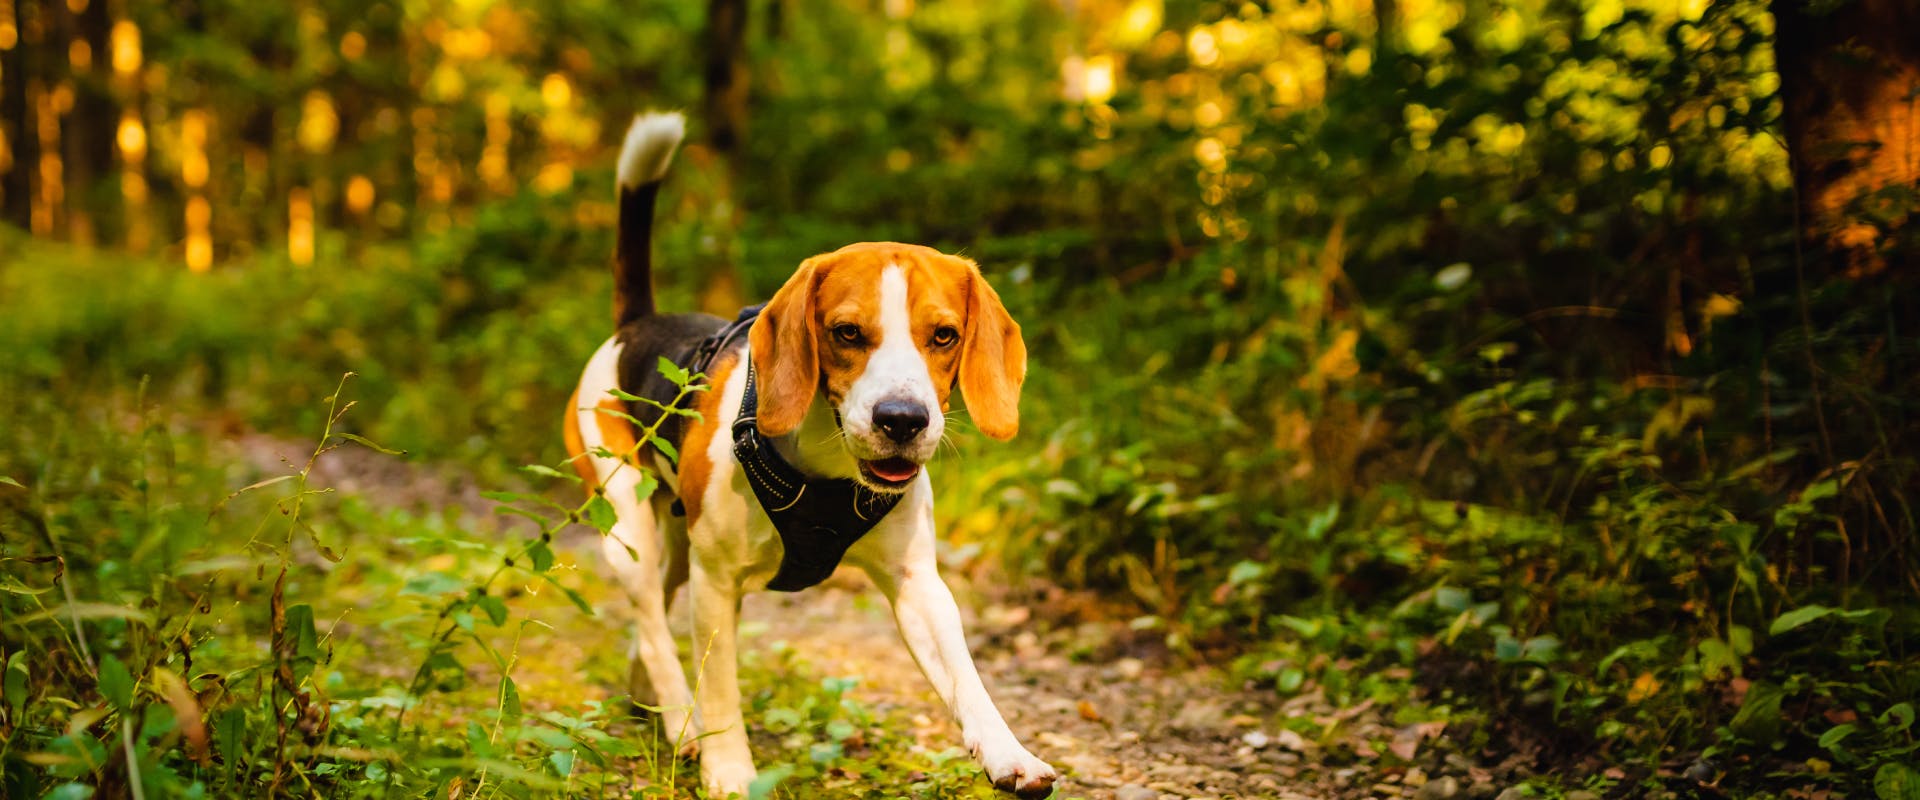 a beagle in a black harness walking along a woodland path next to lots of green plants